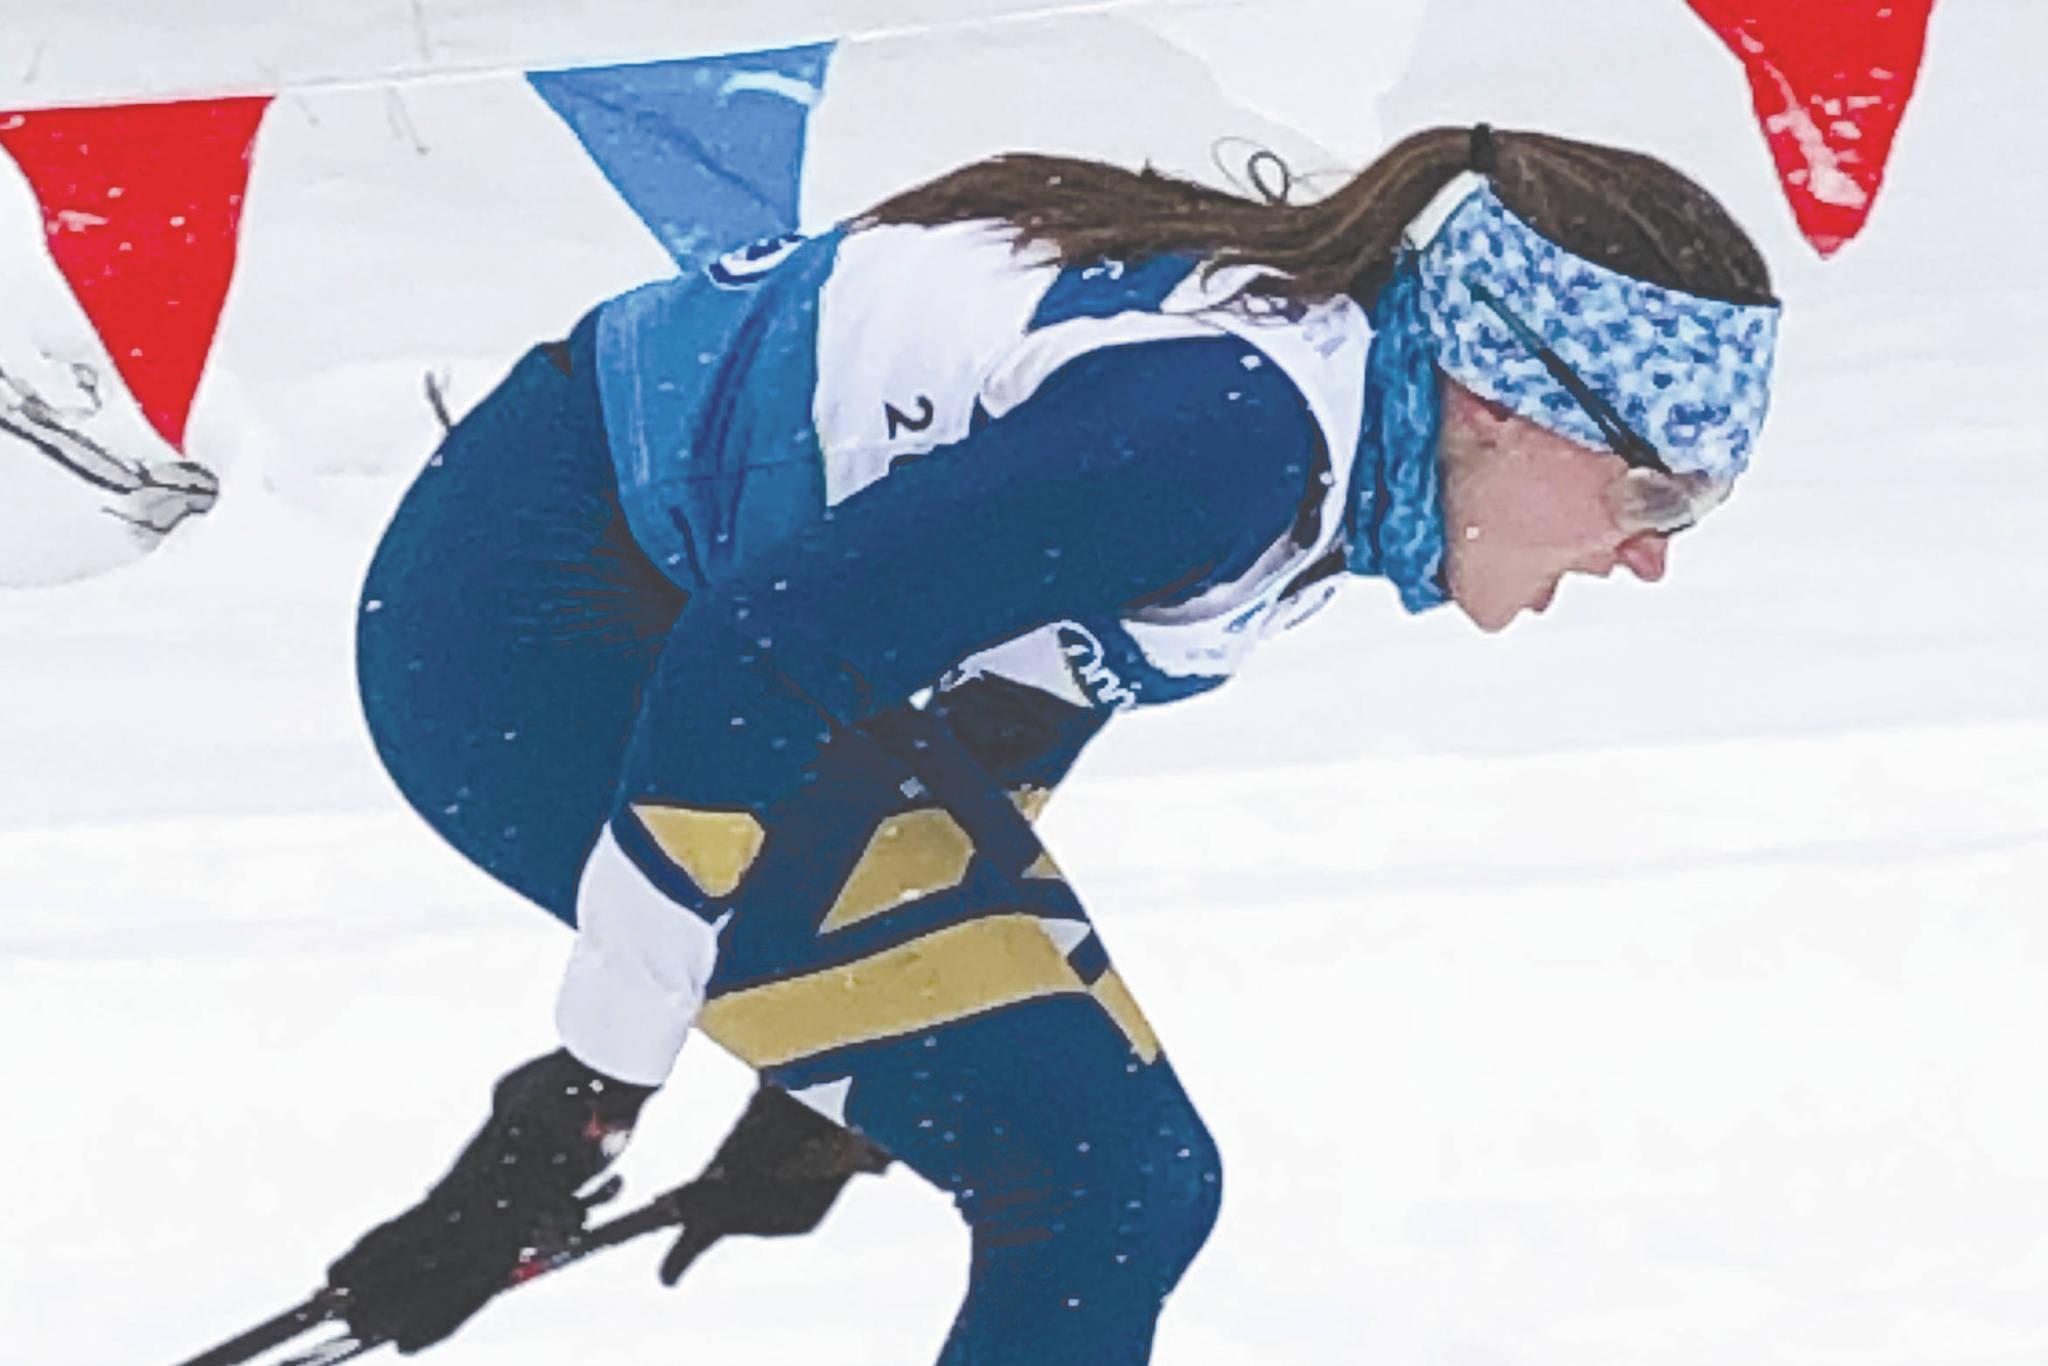 State skiing: Homer’s Daigle, girls capture Division II crowns